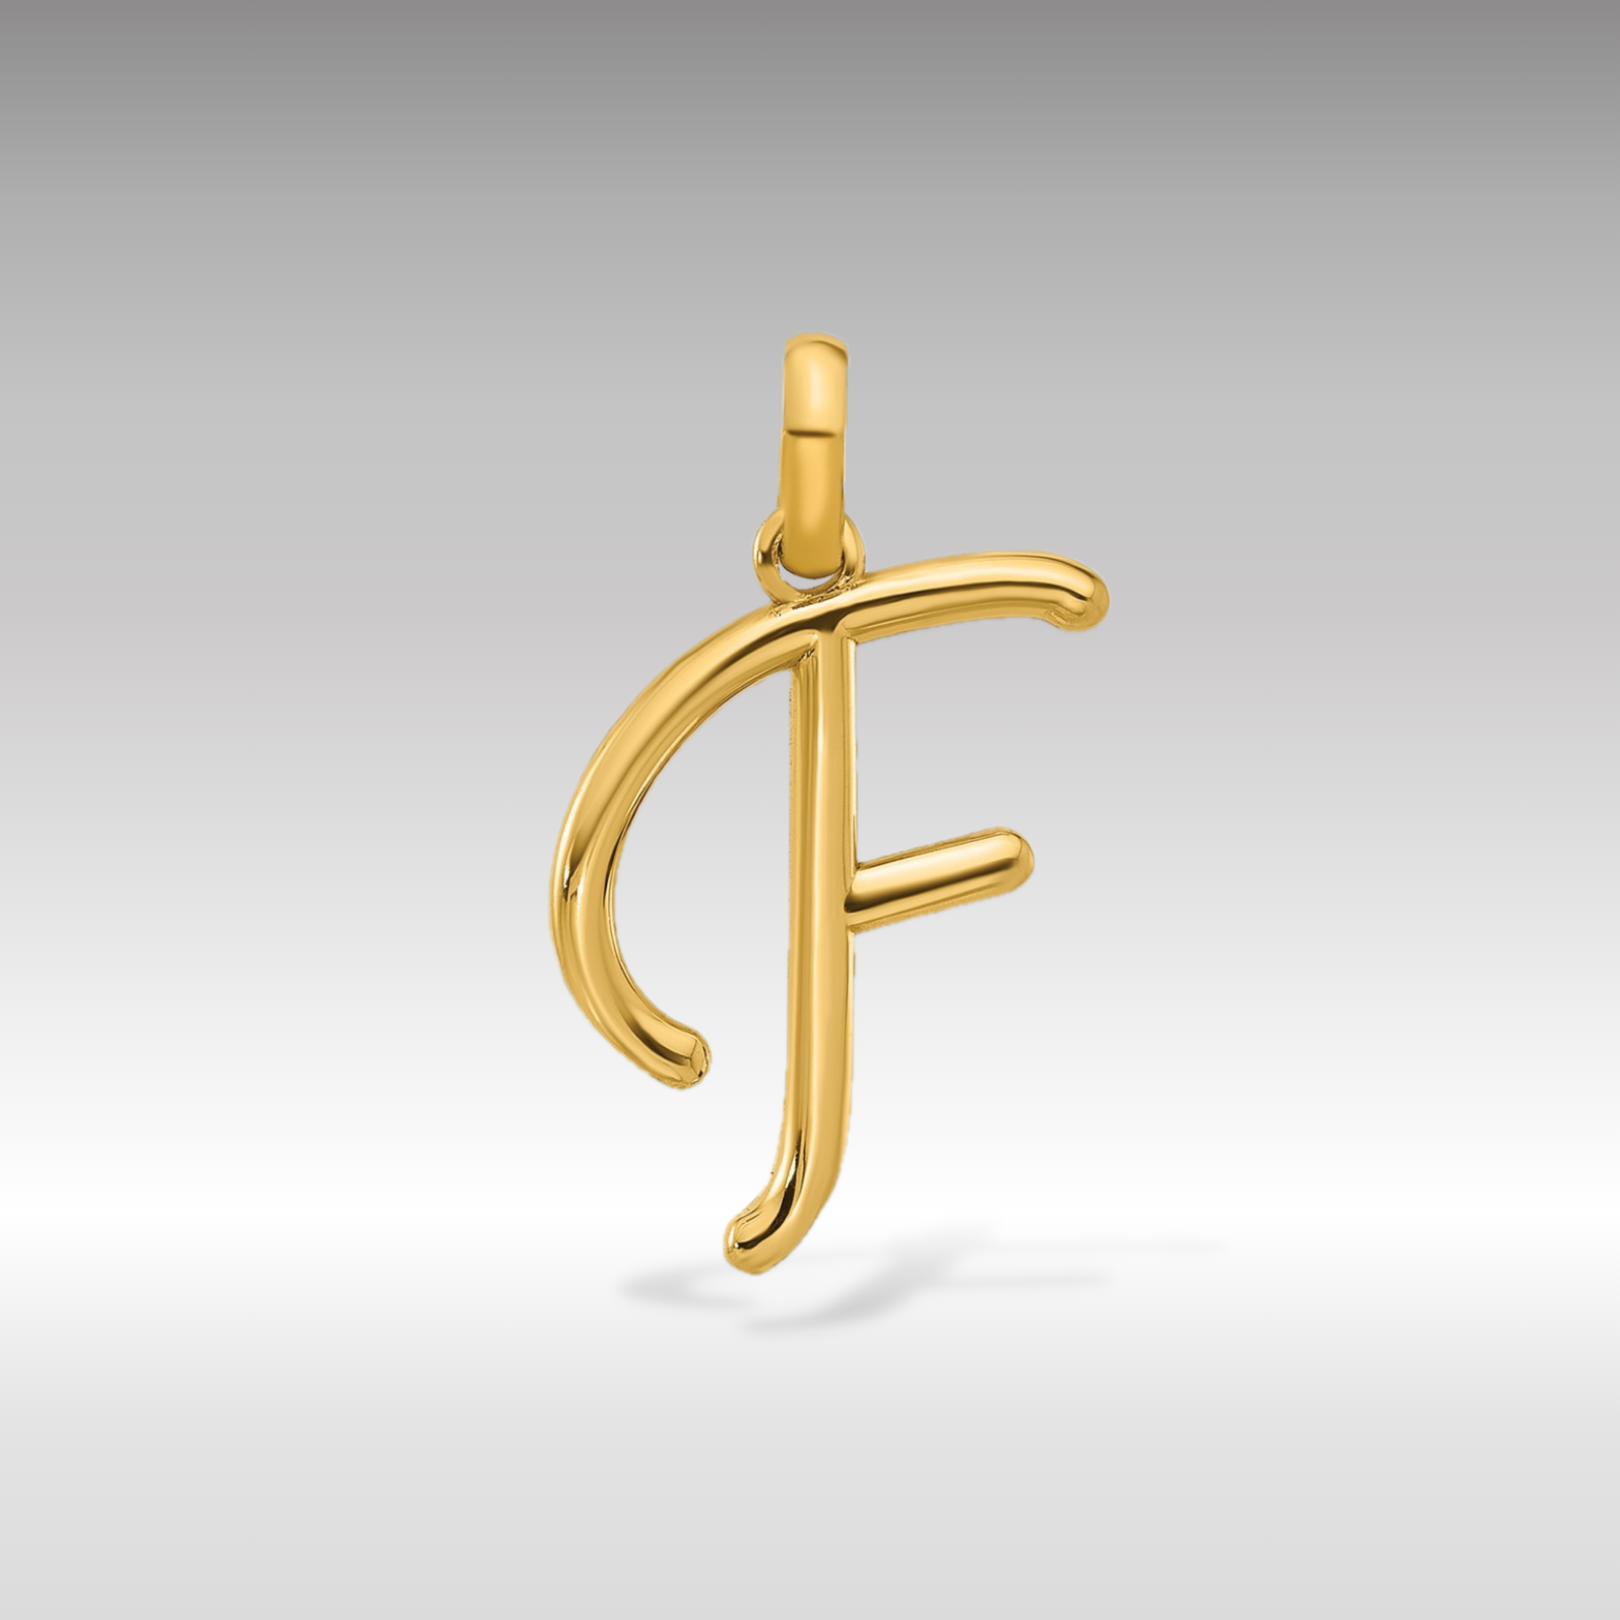 14K Gold Fancy Letter 'F' Charm Pendant - Charlie & Co. Jewelry